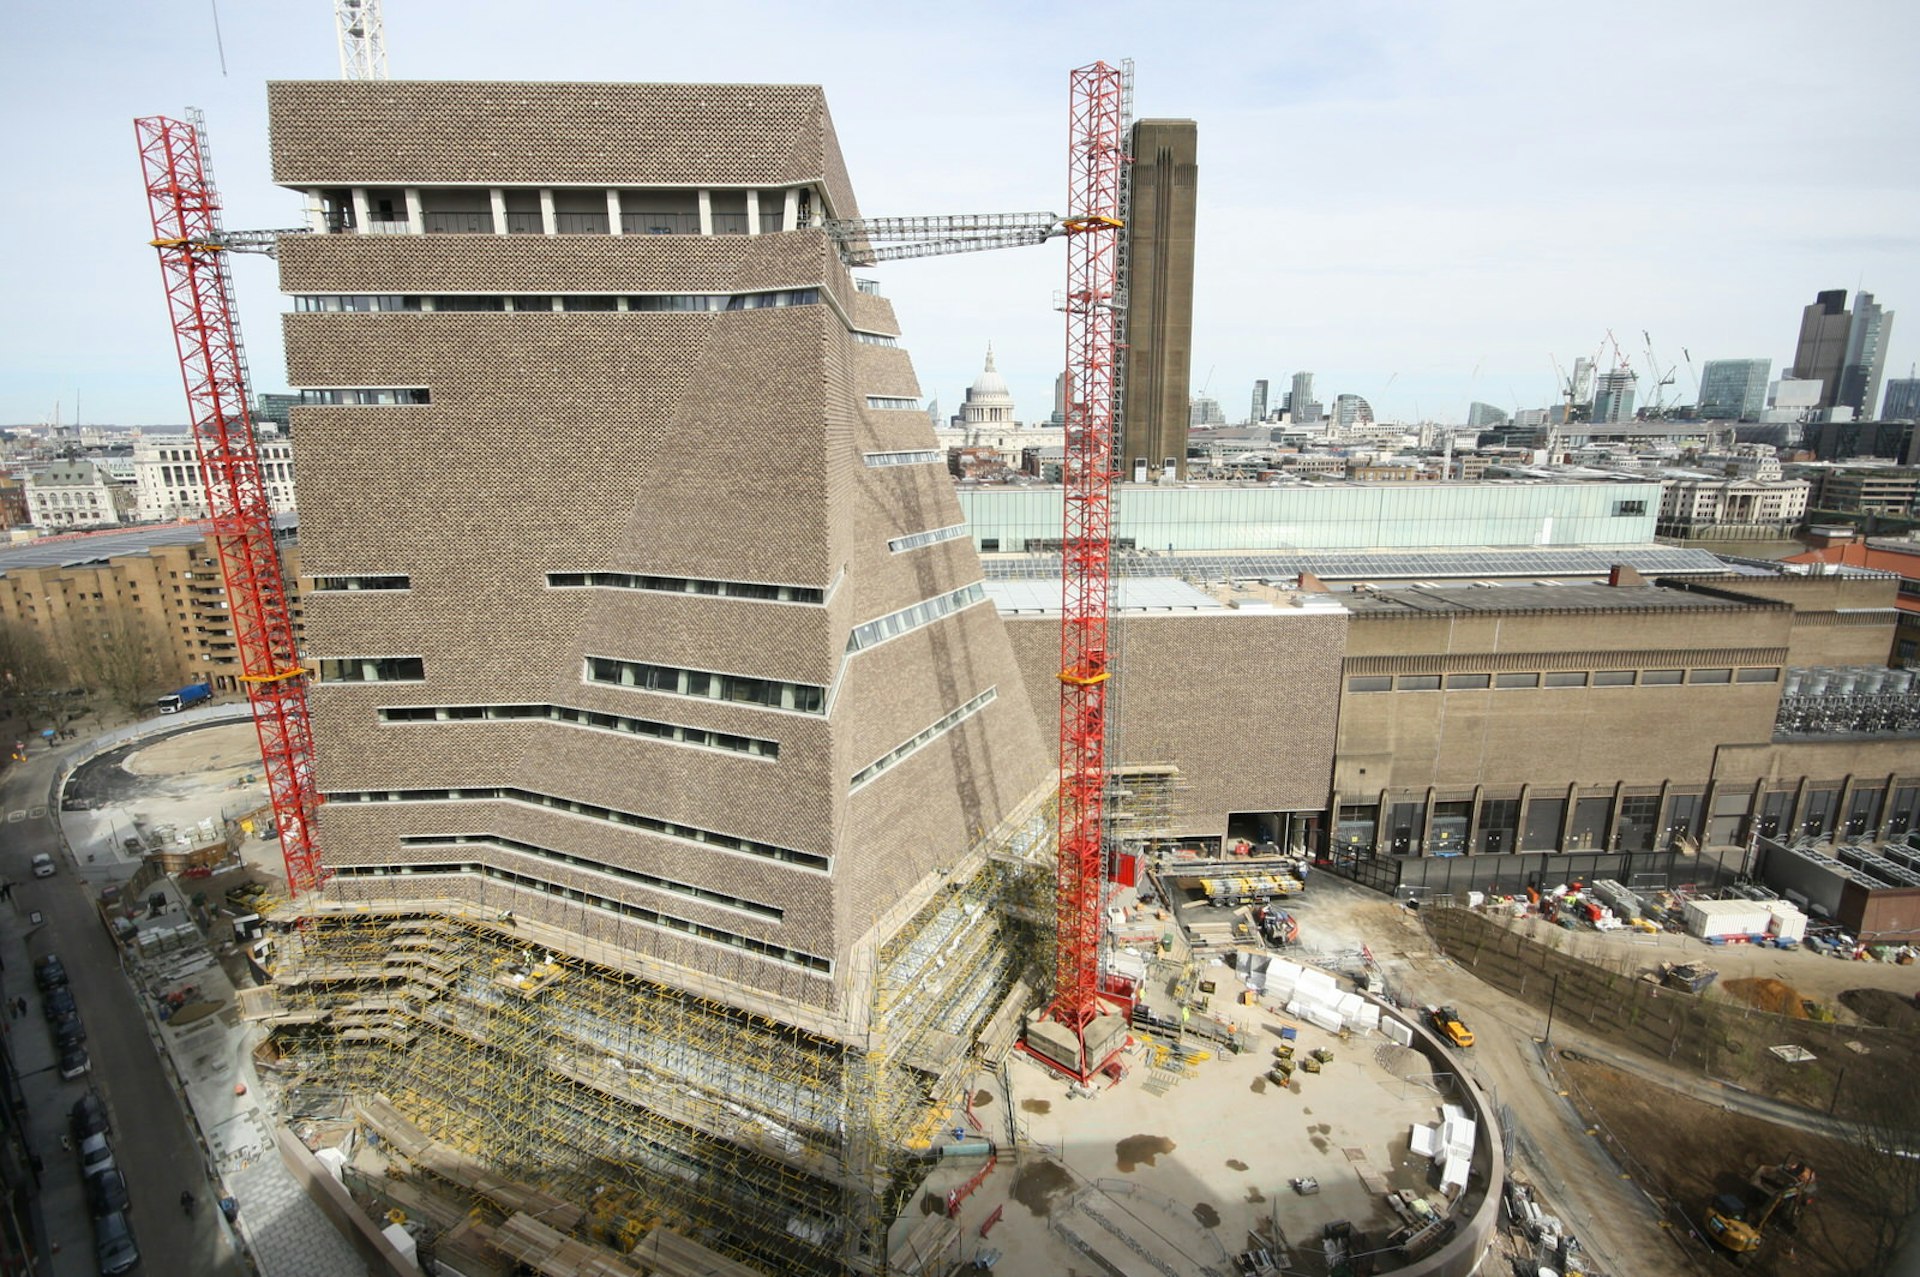 Tate Modern's extension taking shape earlier this year © Tate Photography 